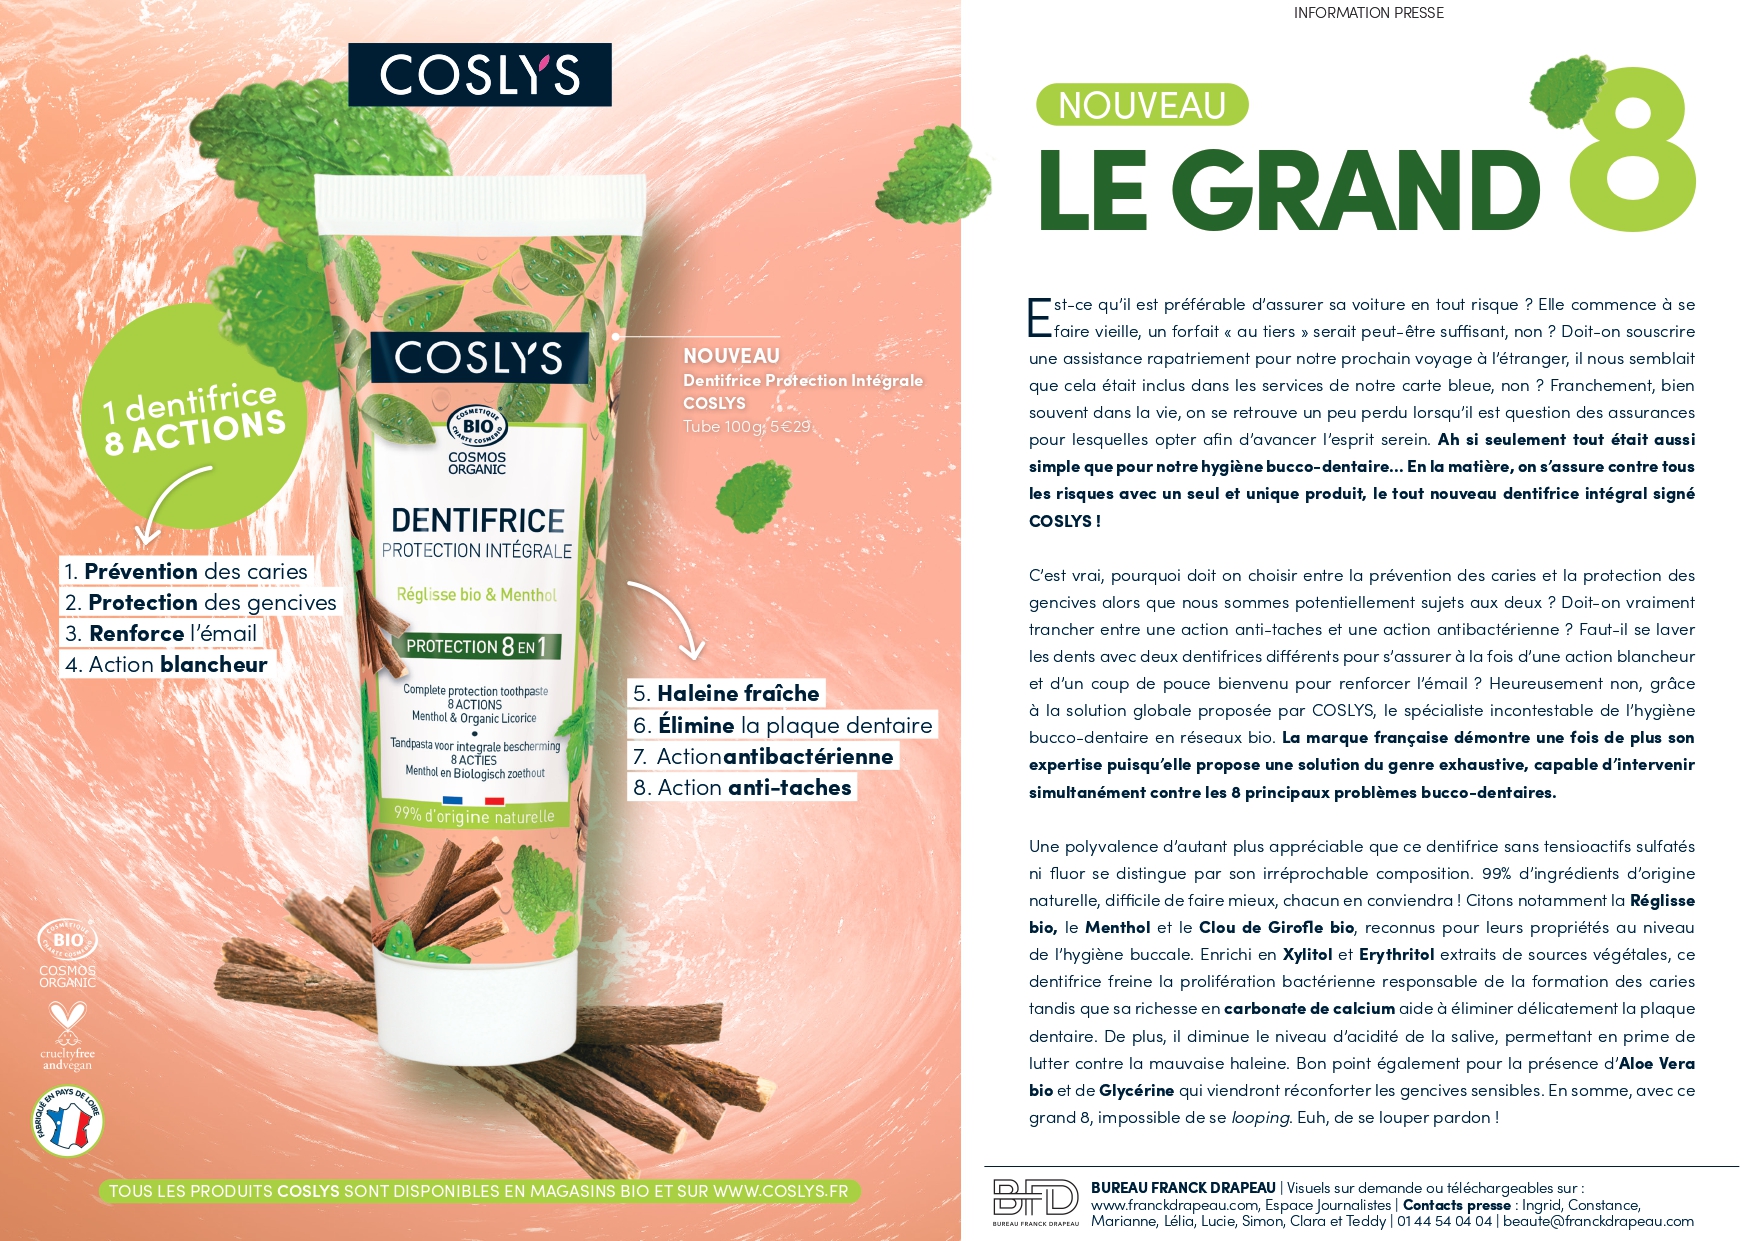 Coslys | Dentifrice Protection Intégrale